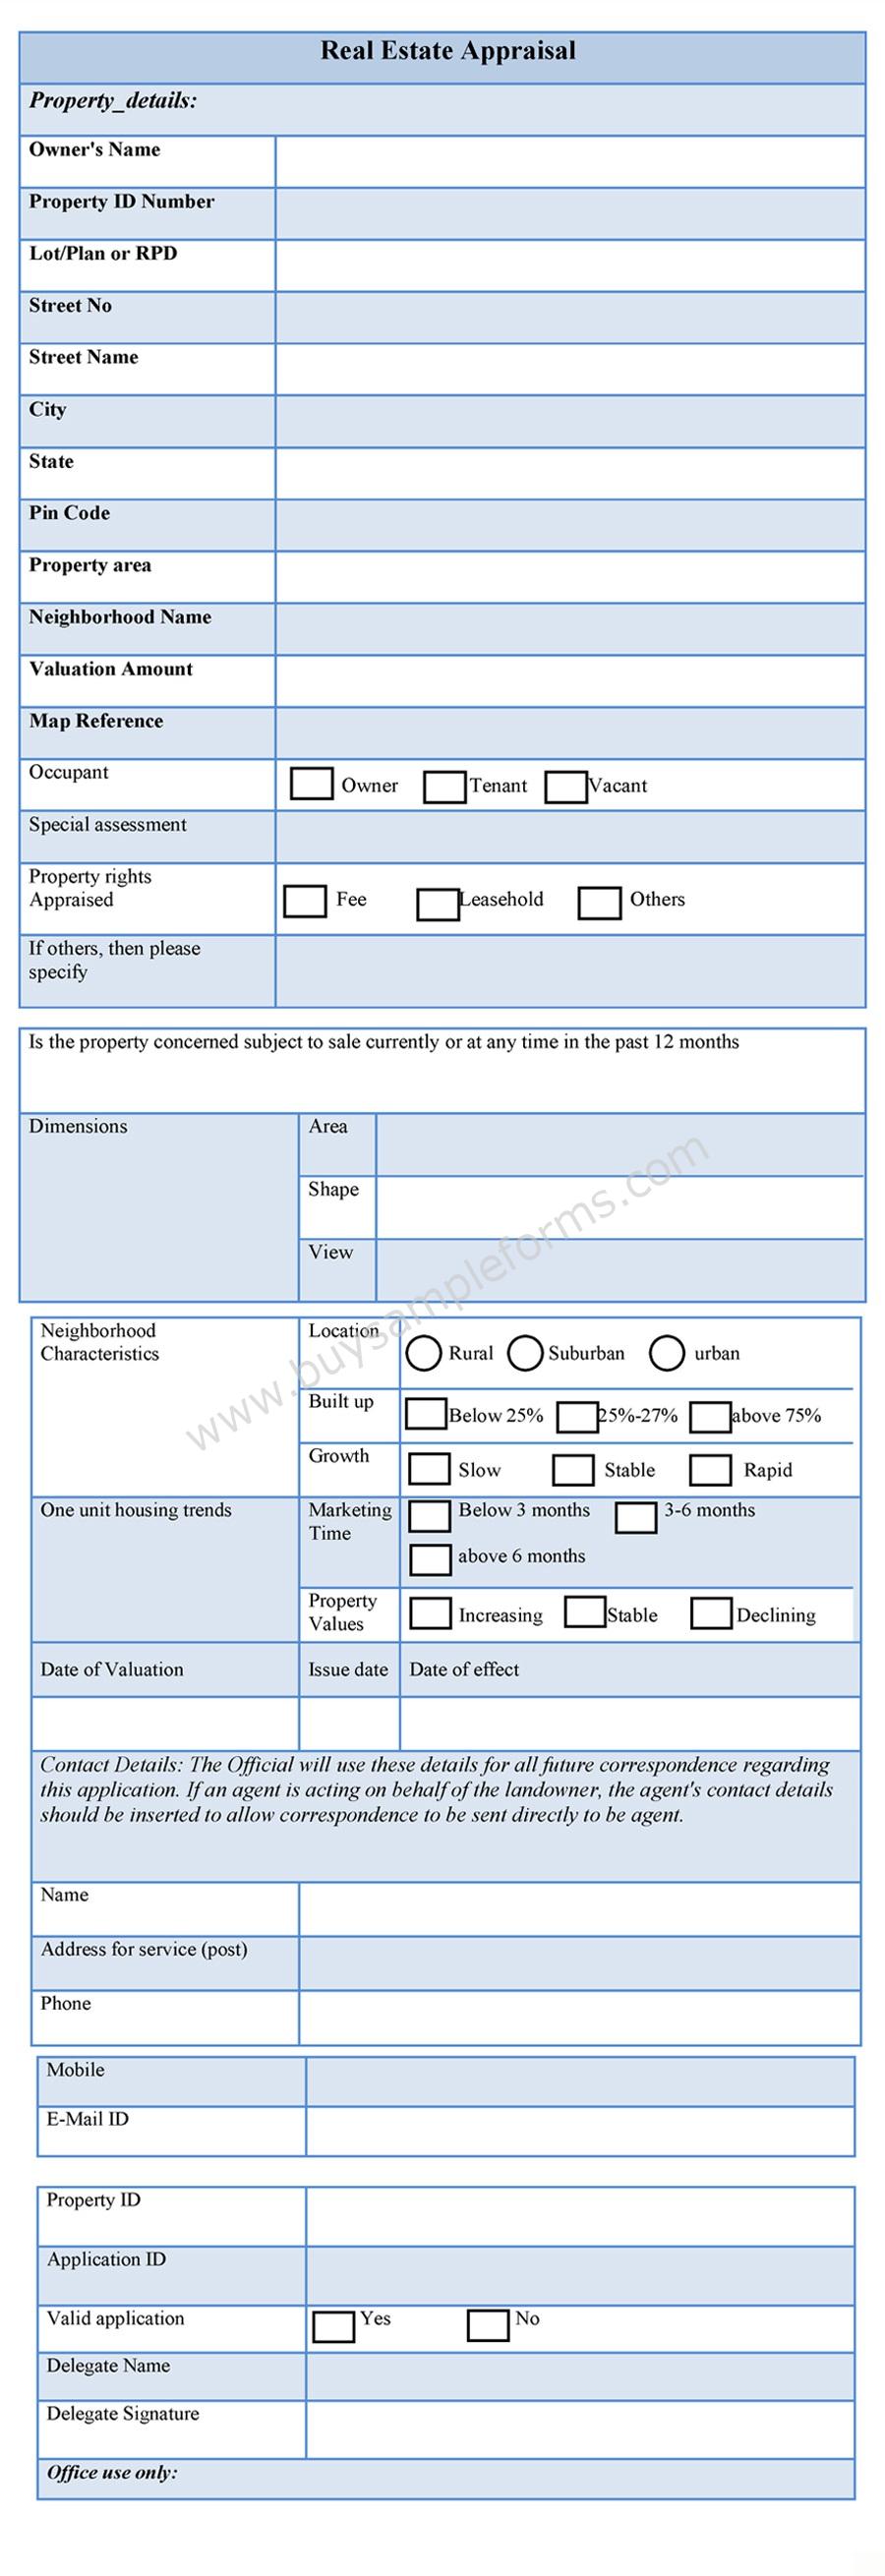 real estate appraisal forms template